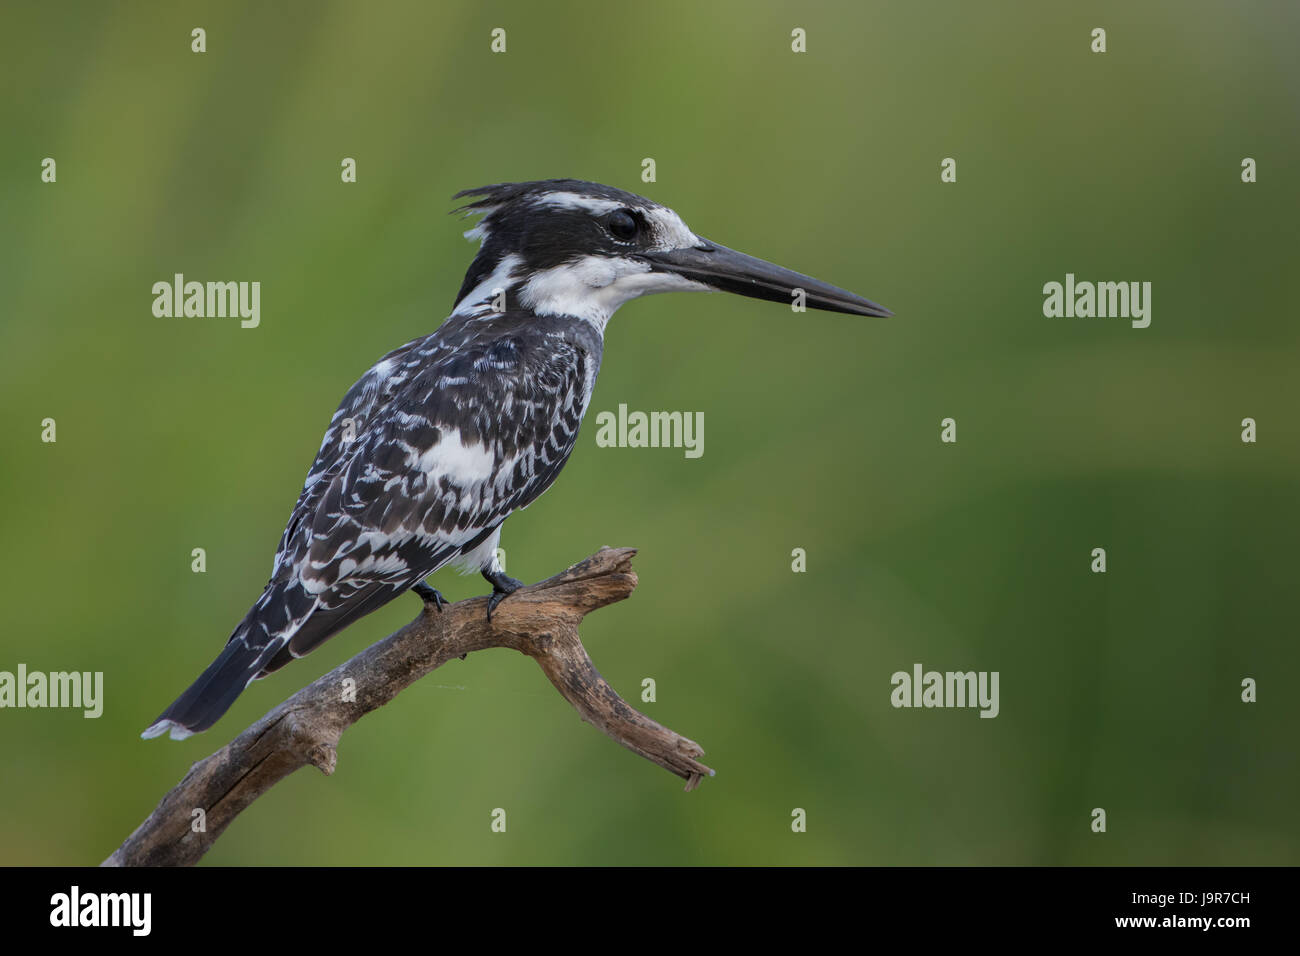 Pied kingfisher portrait on a green background Stock Photo